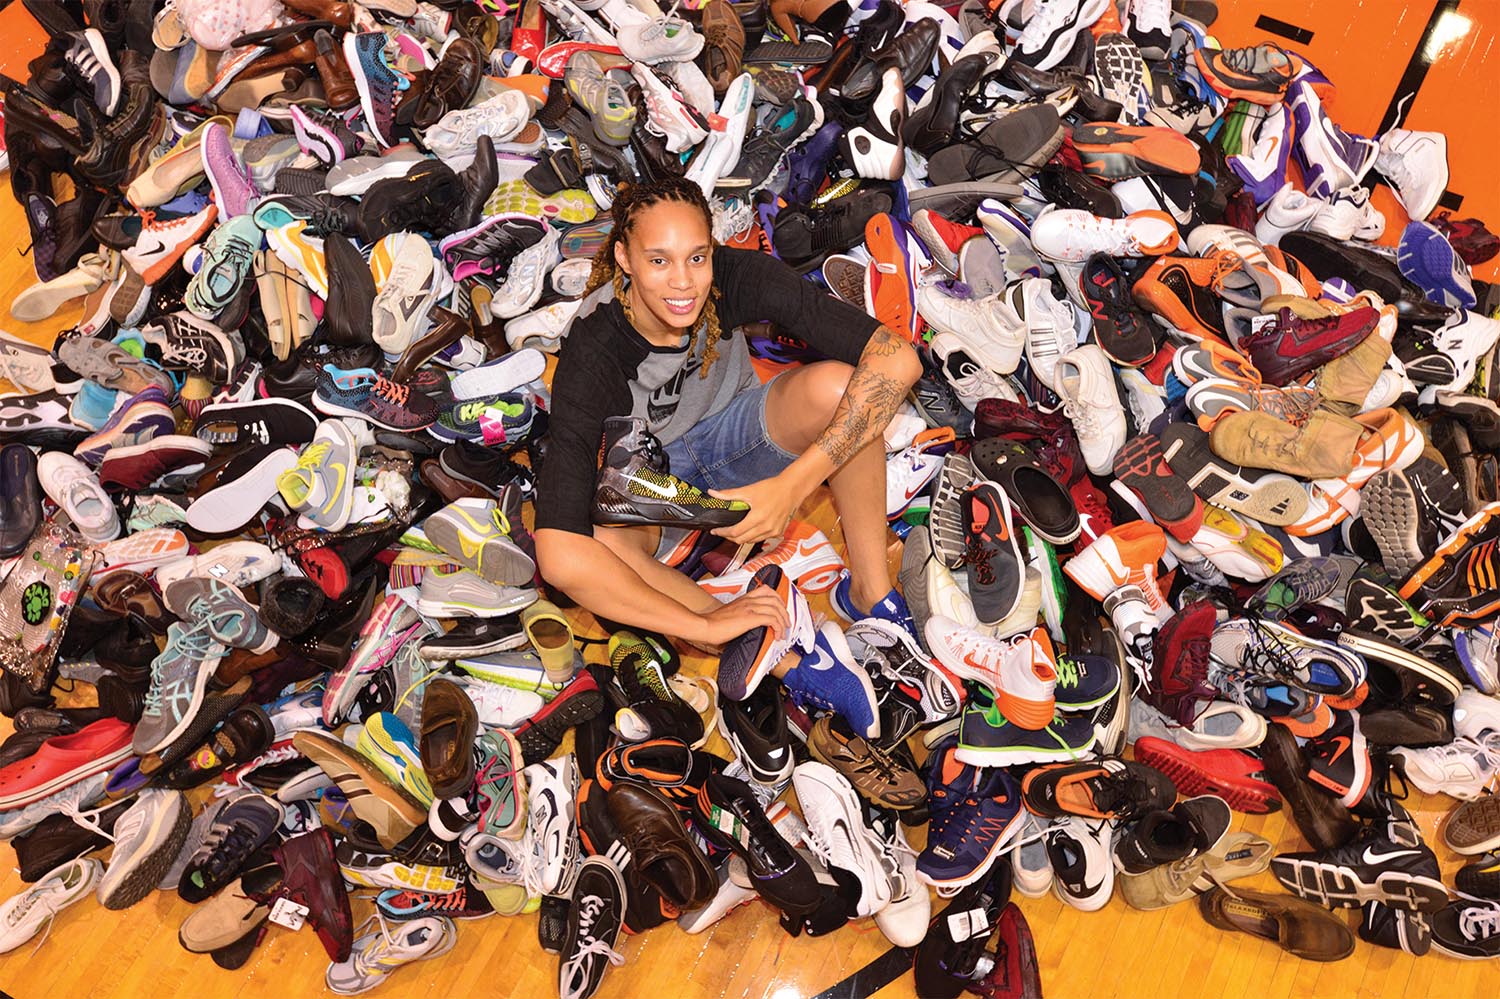 BG’s Heart and Sole Shoe Drive continues